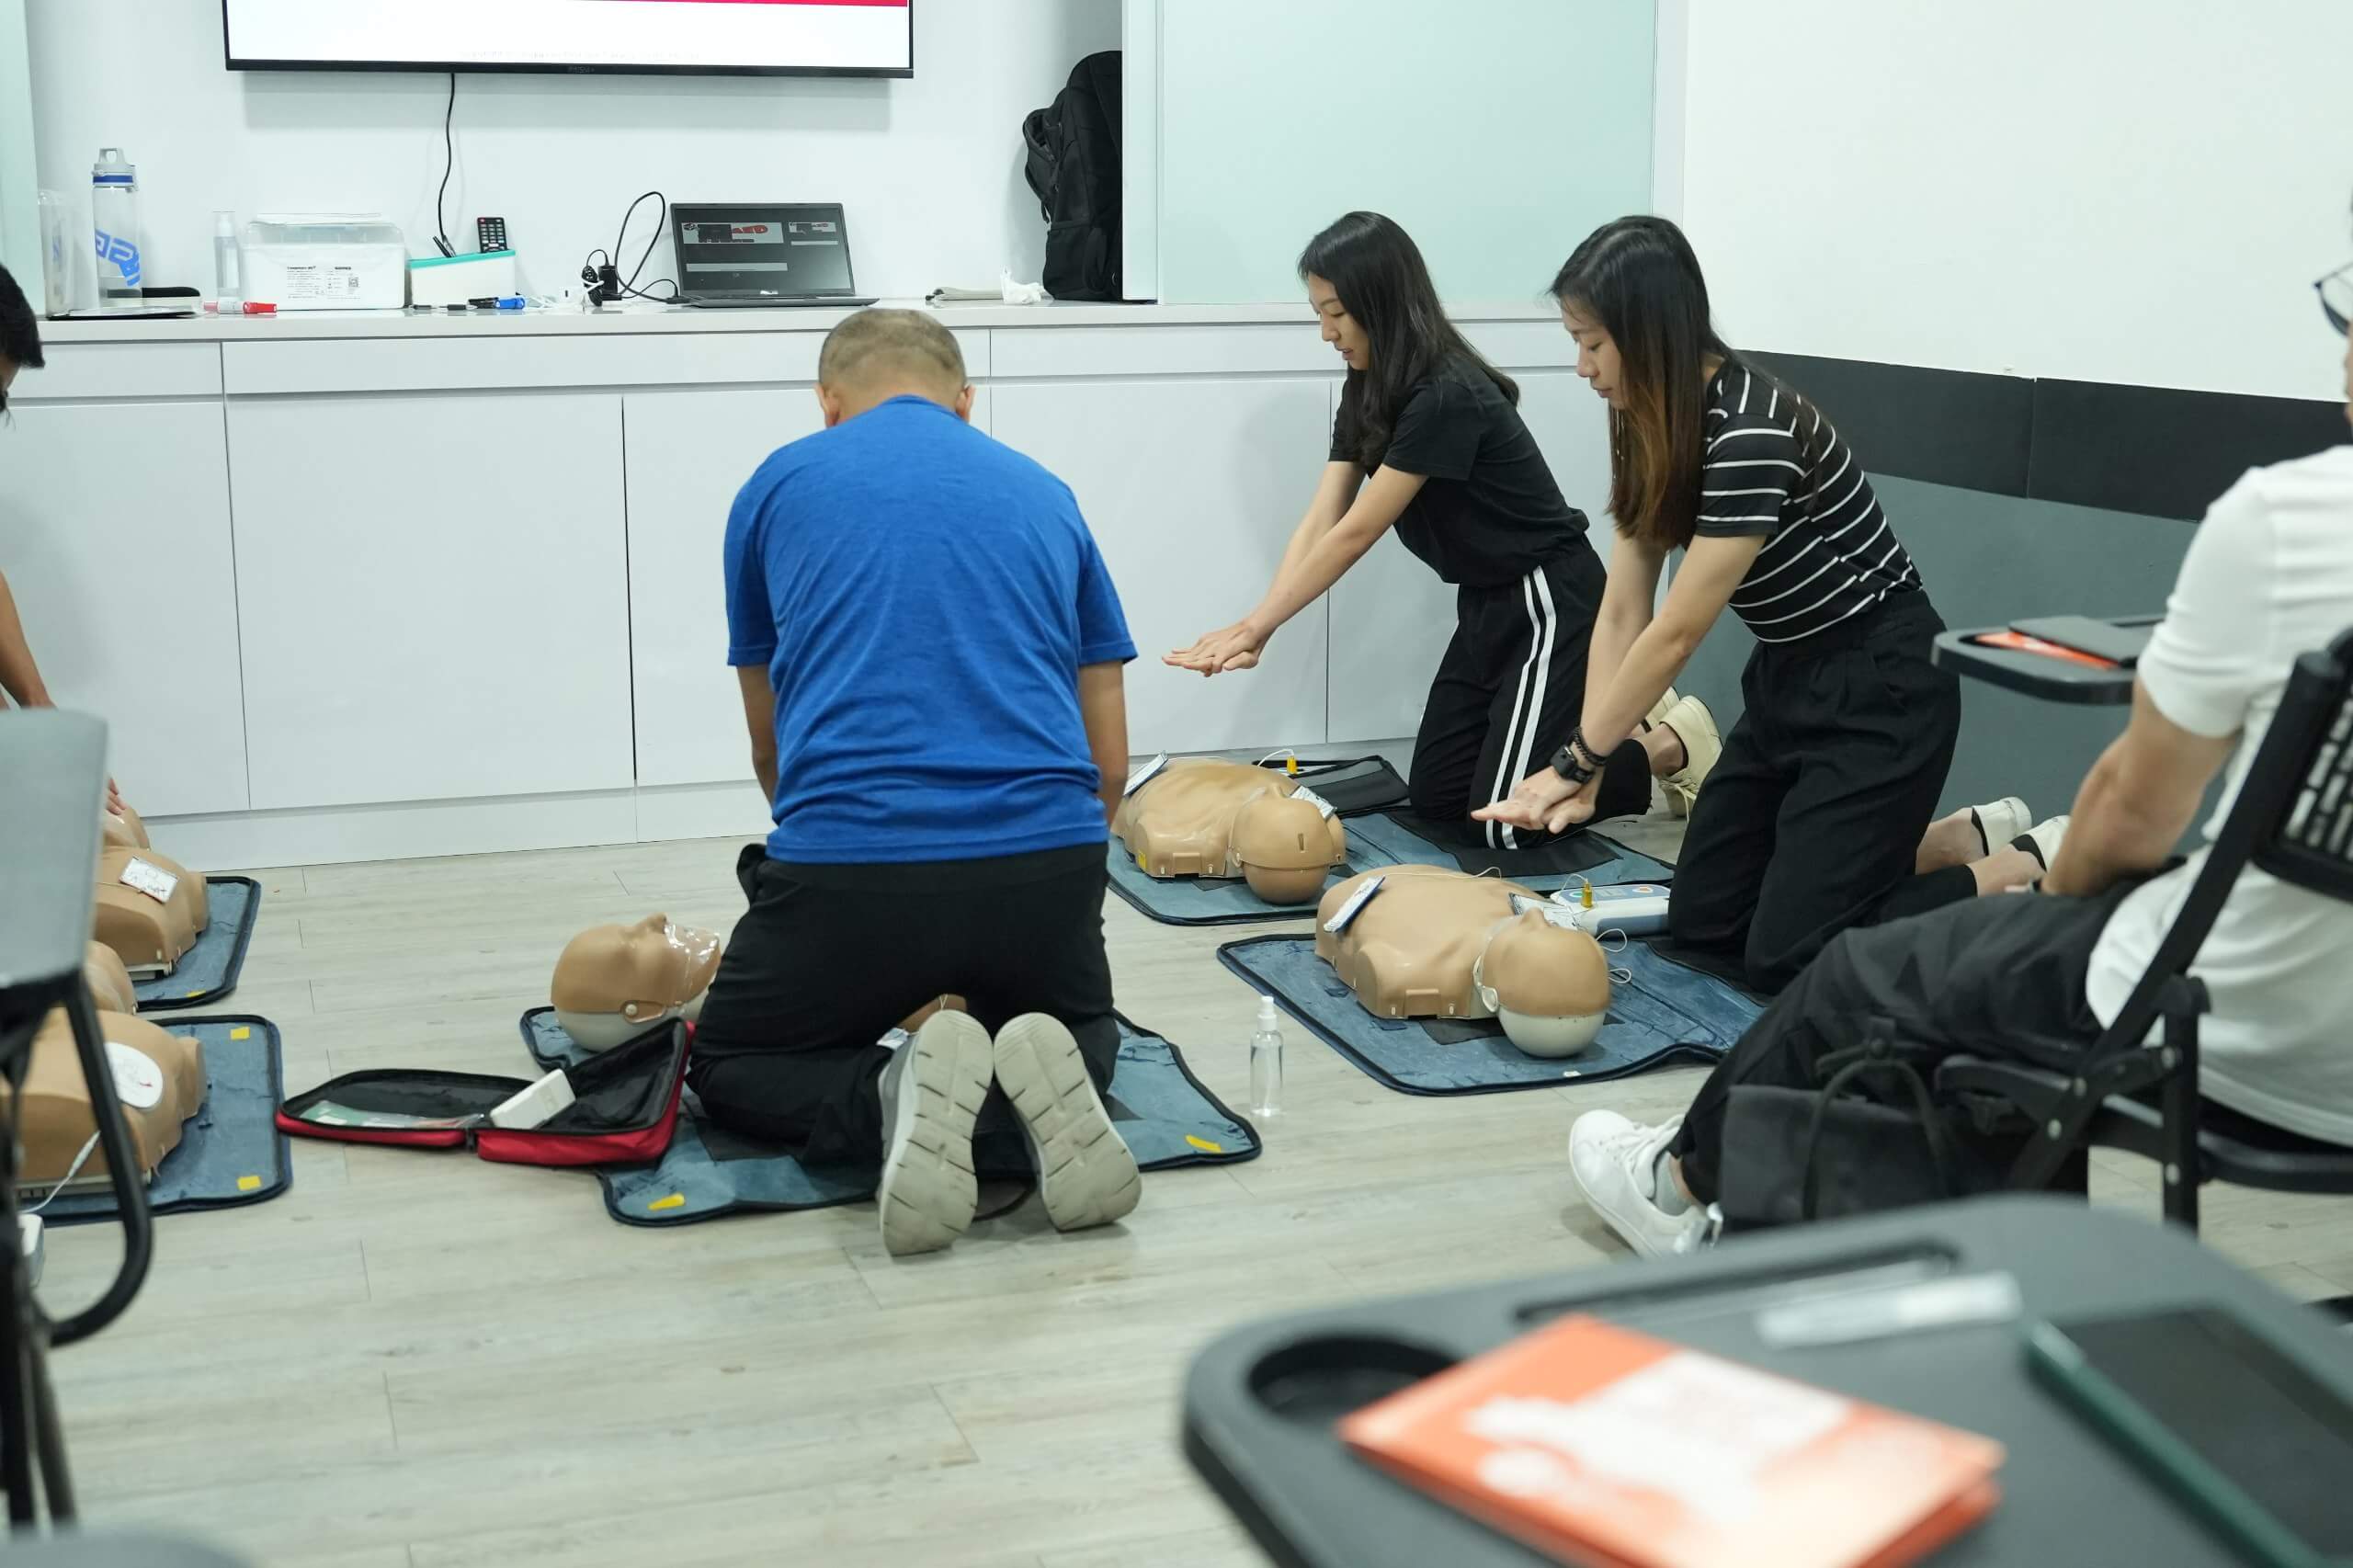 Standard First Aider performing CPR